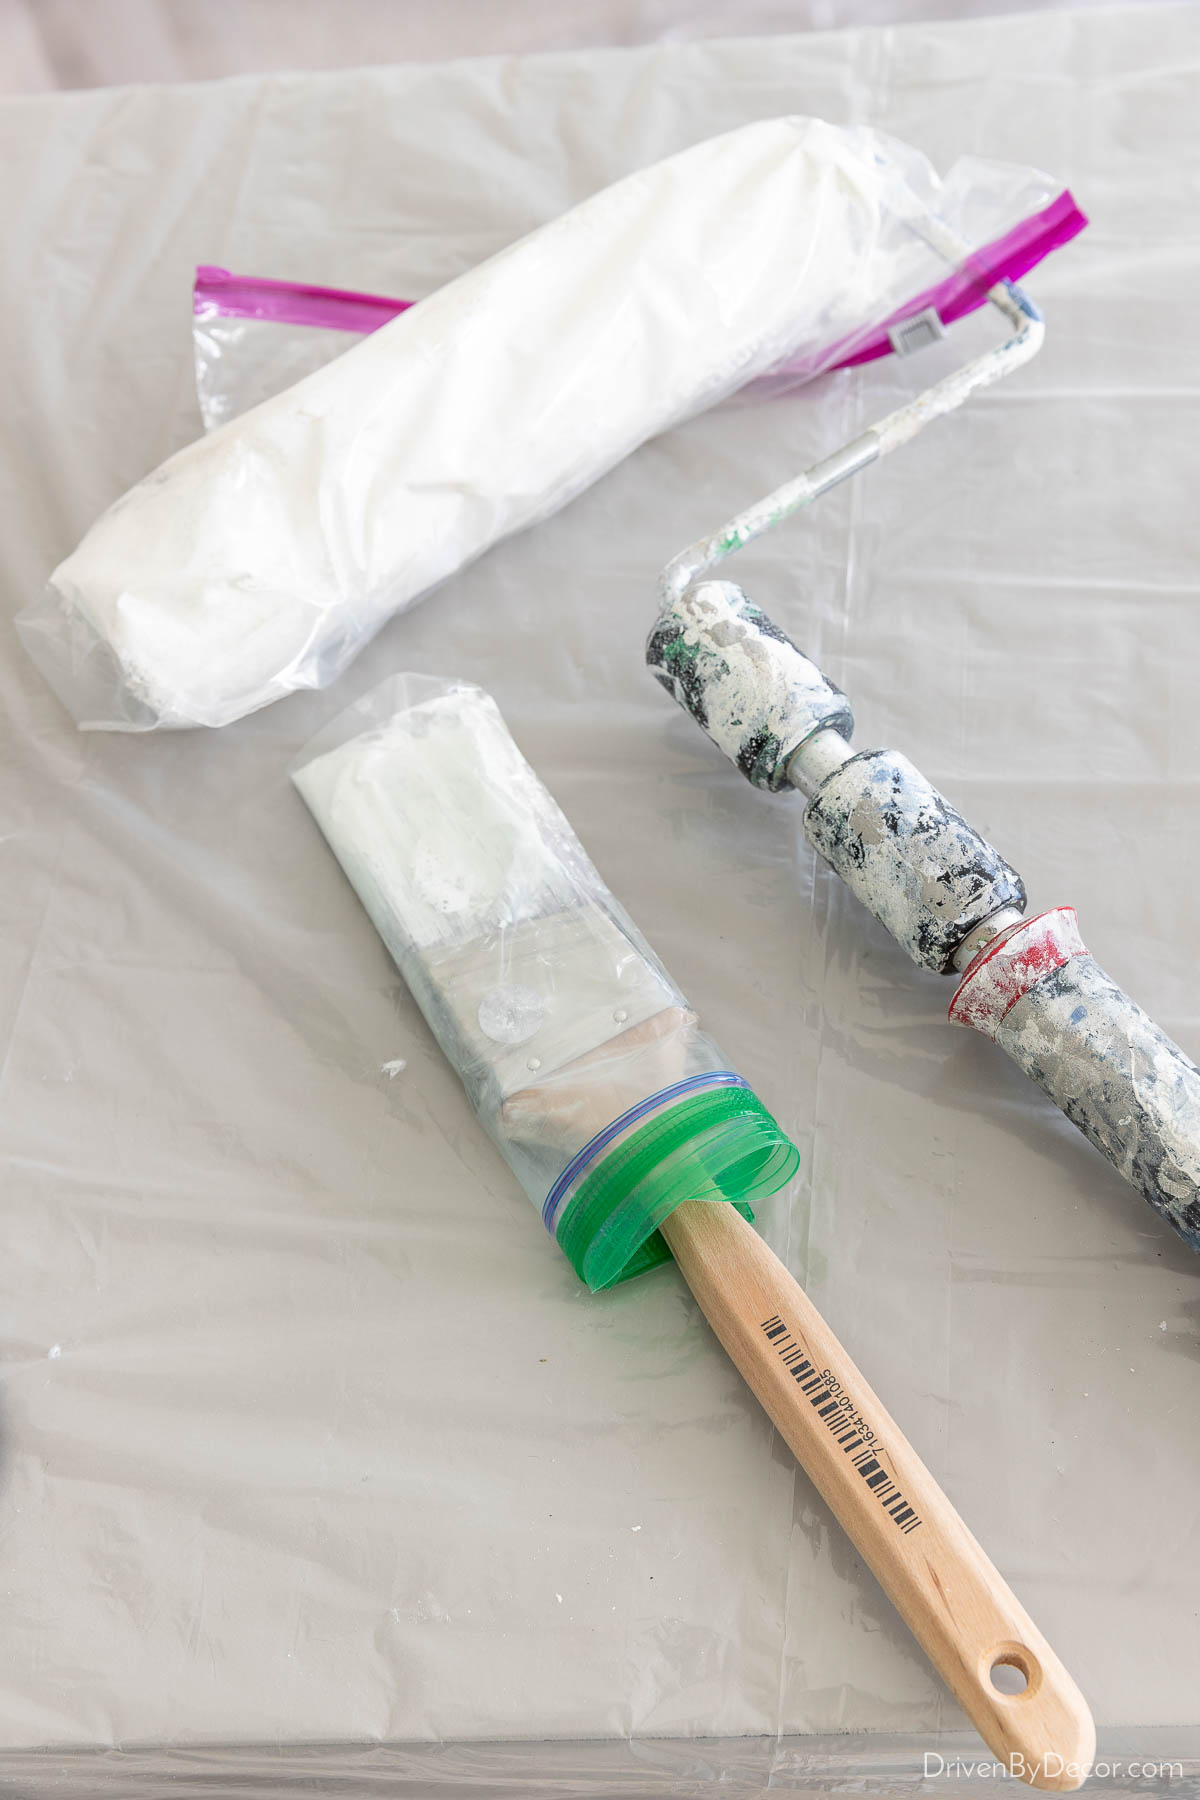 Wrap paintbrush and roller in plastic before storing in refrigerator